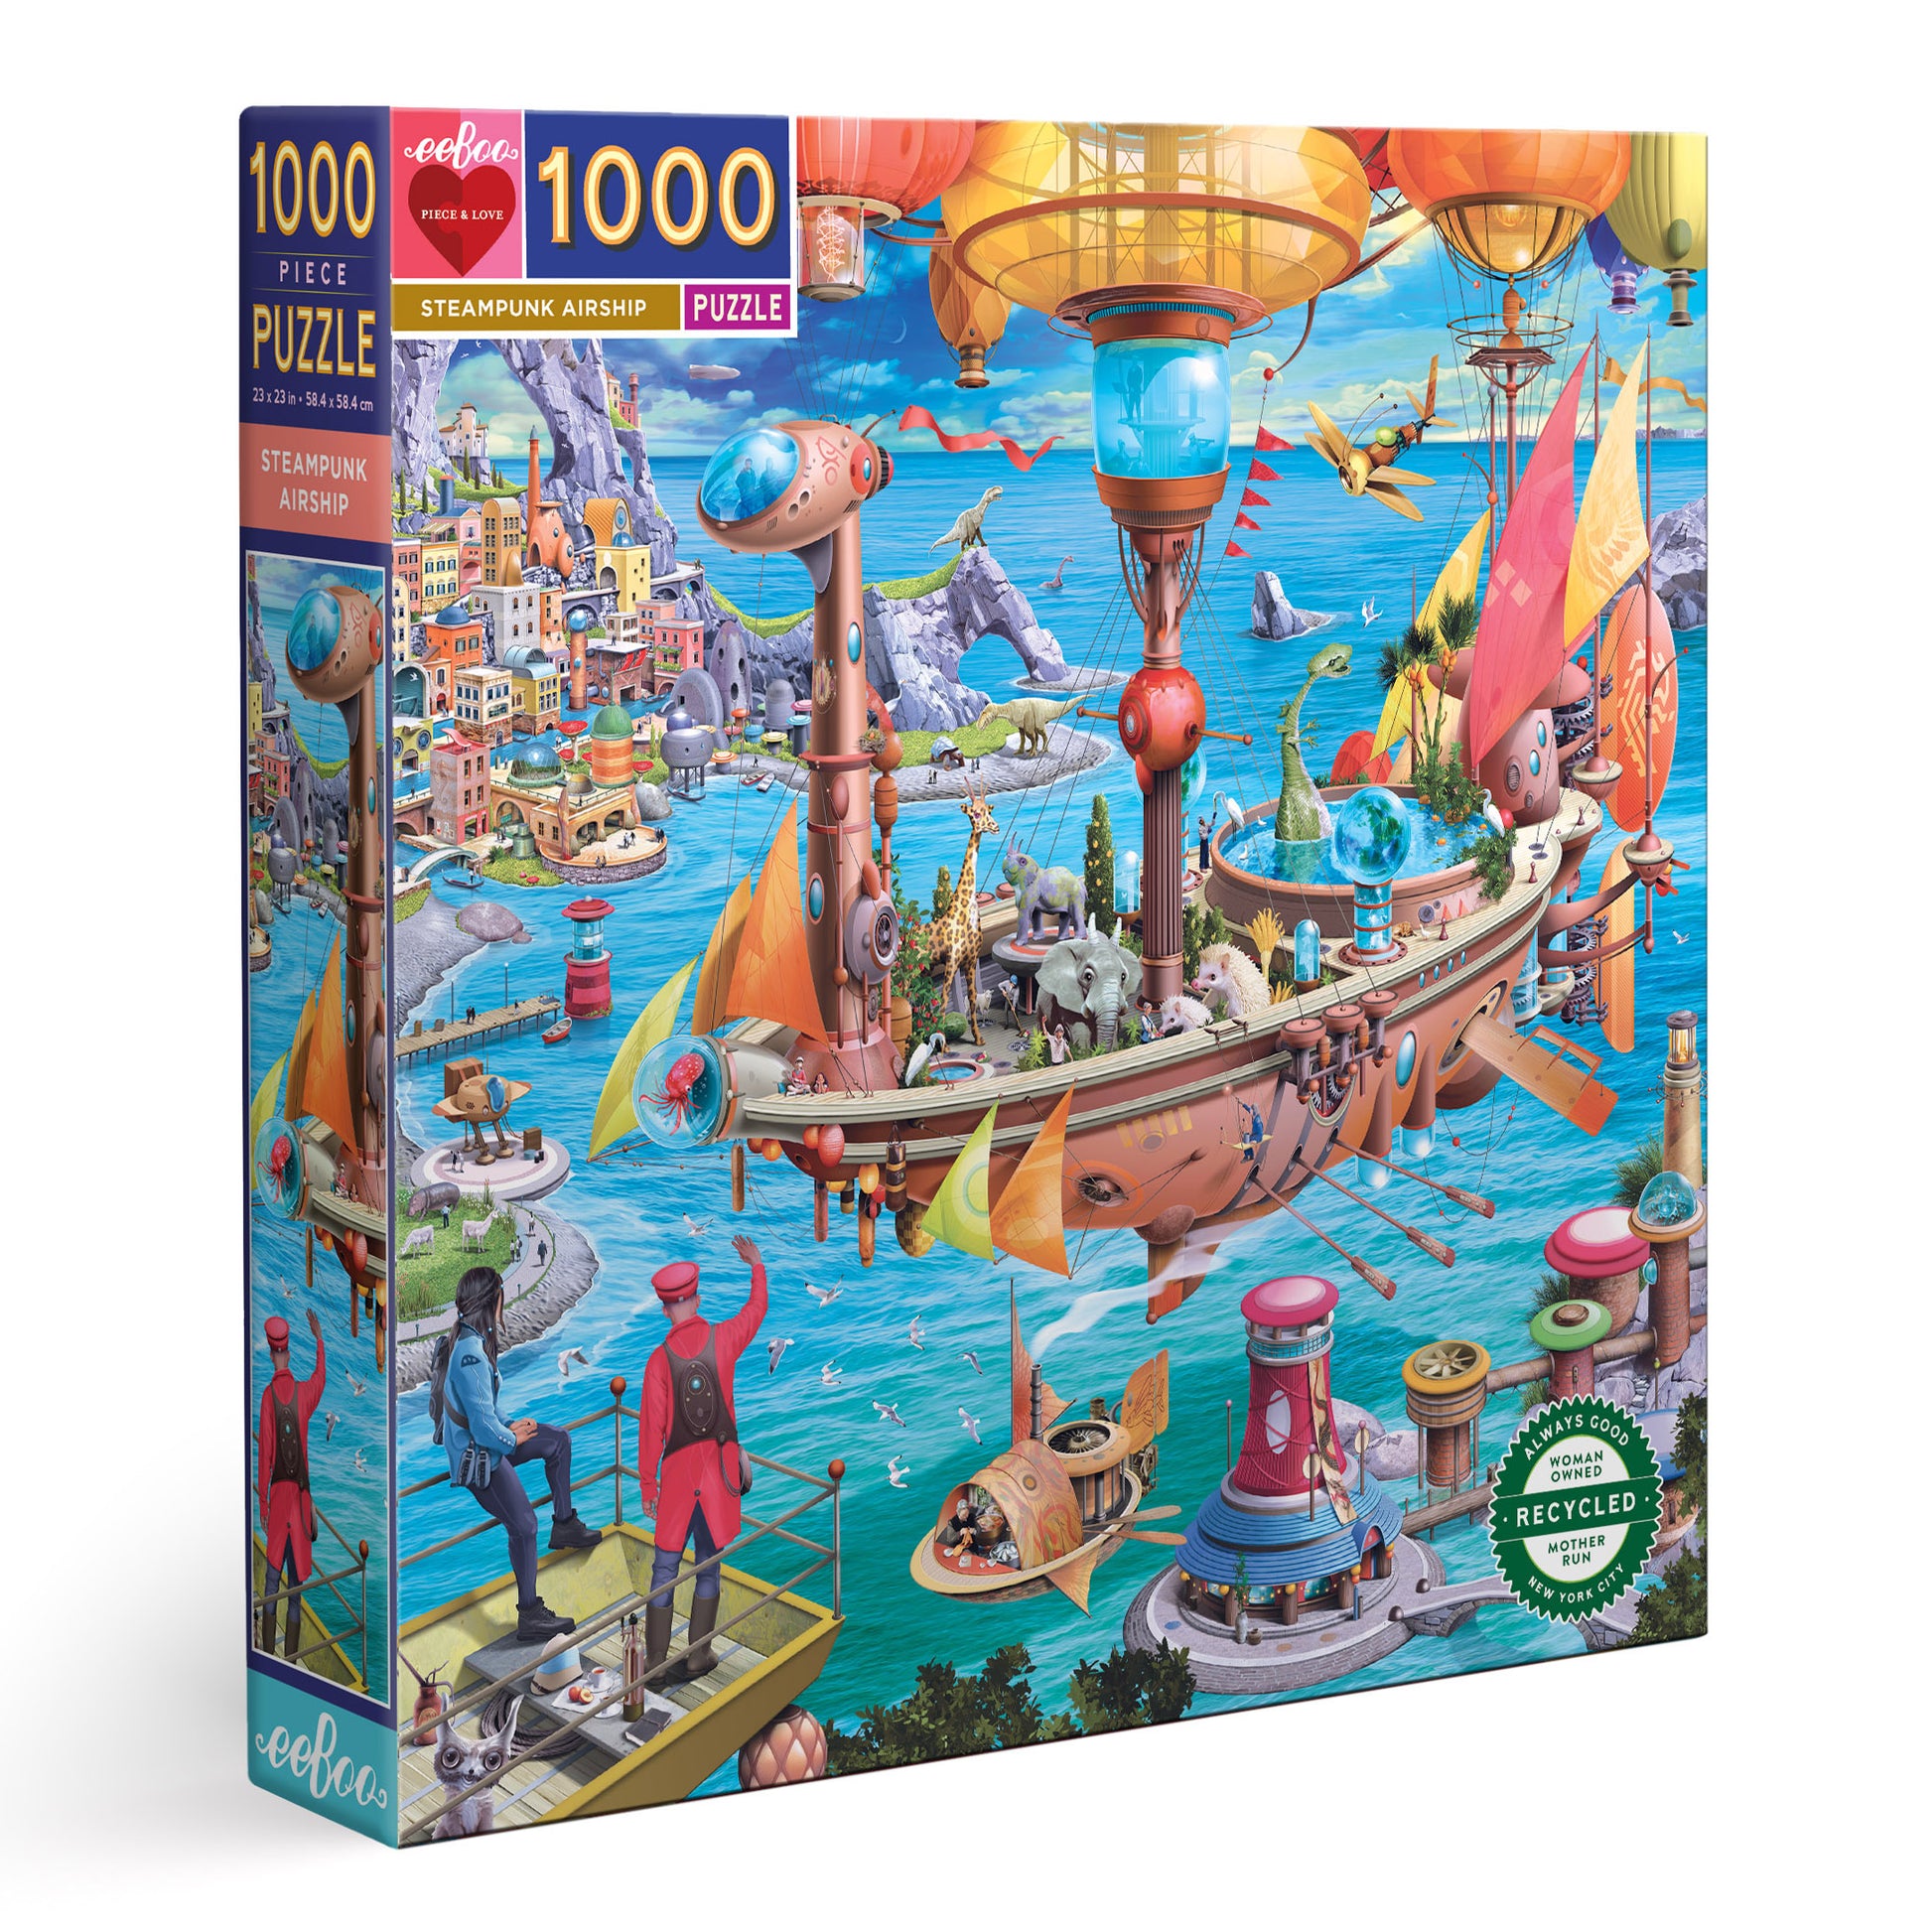 Steampunk Airship 1000 Piece Jigsaw Puzzle | eeBoo Piece & Love | Makes a Great Gift